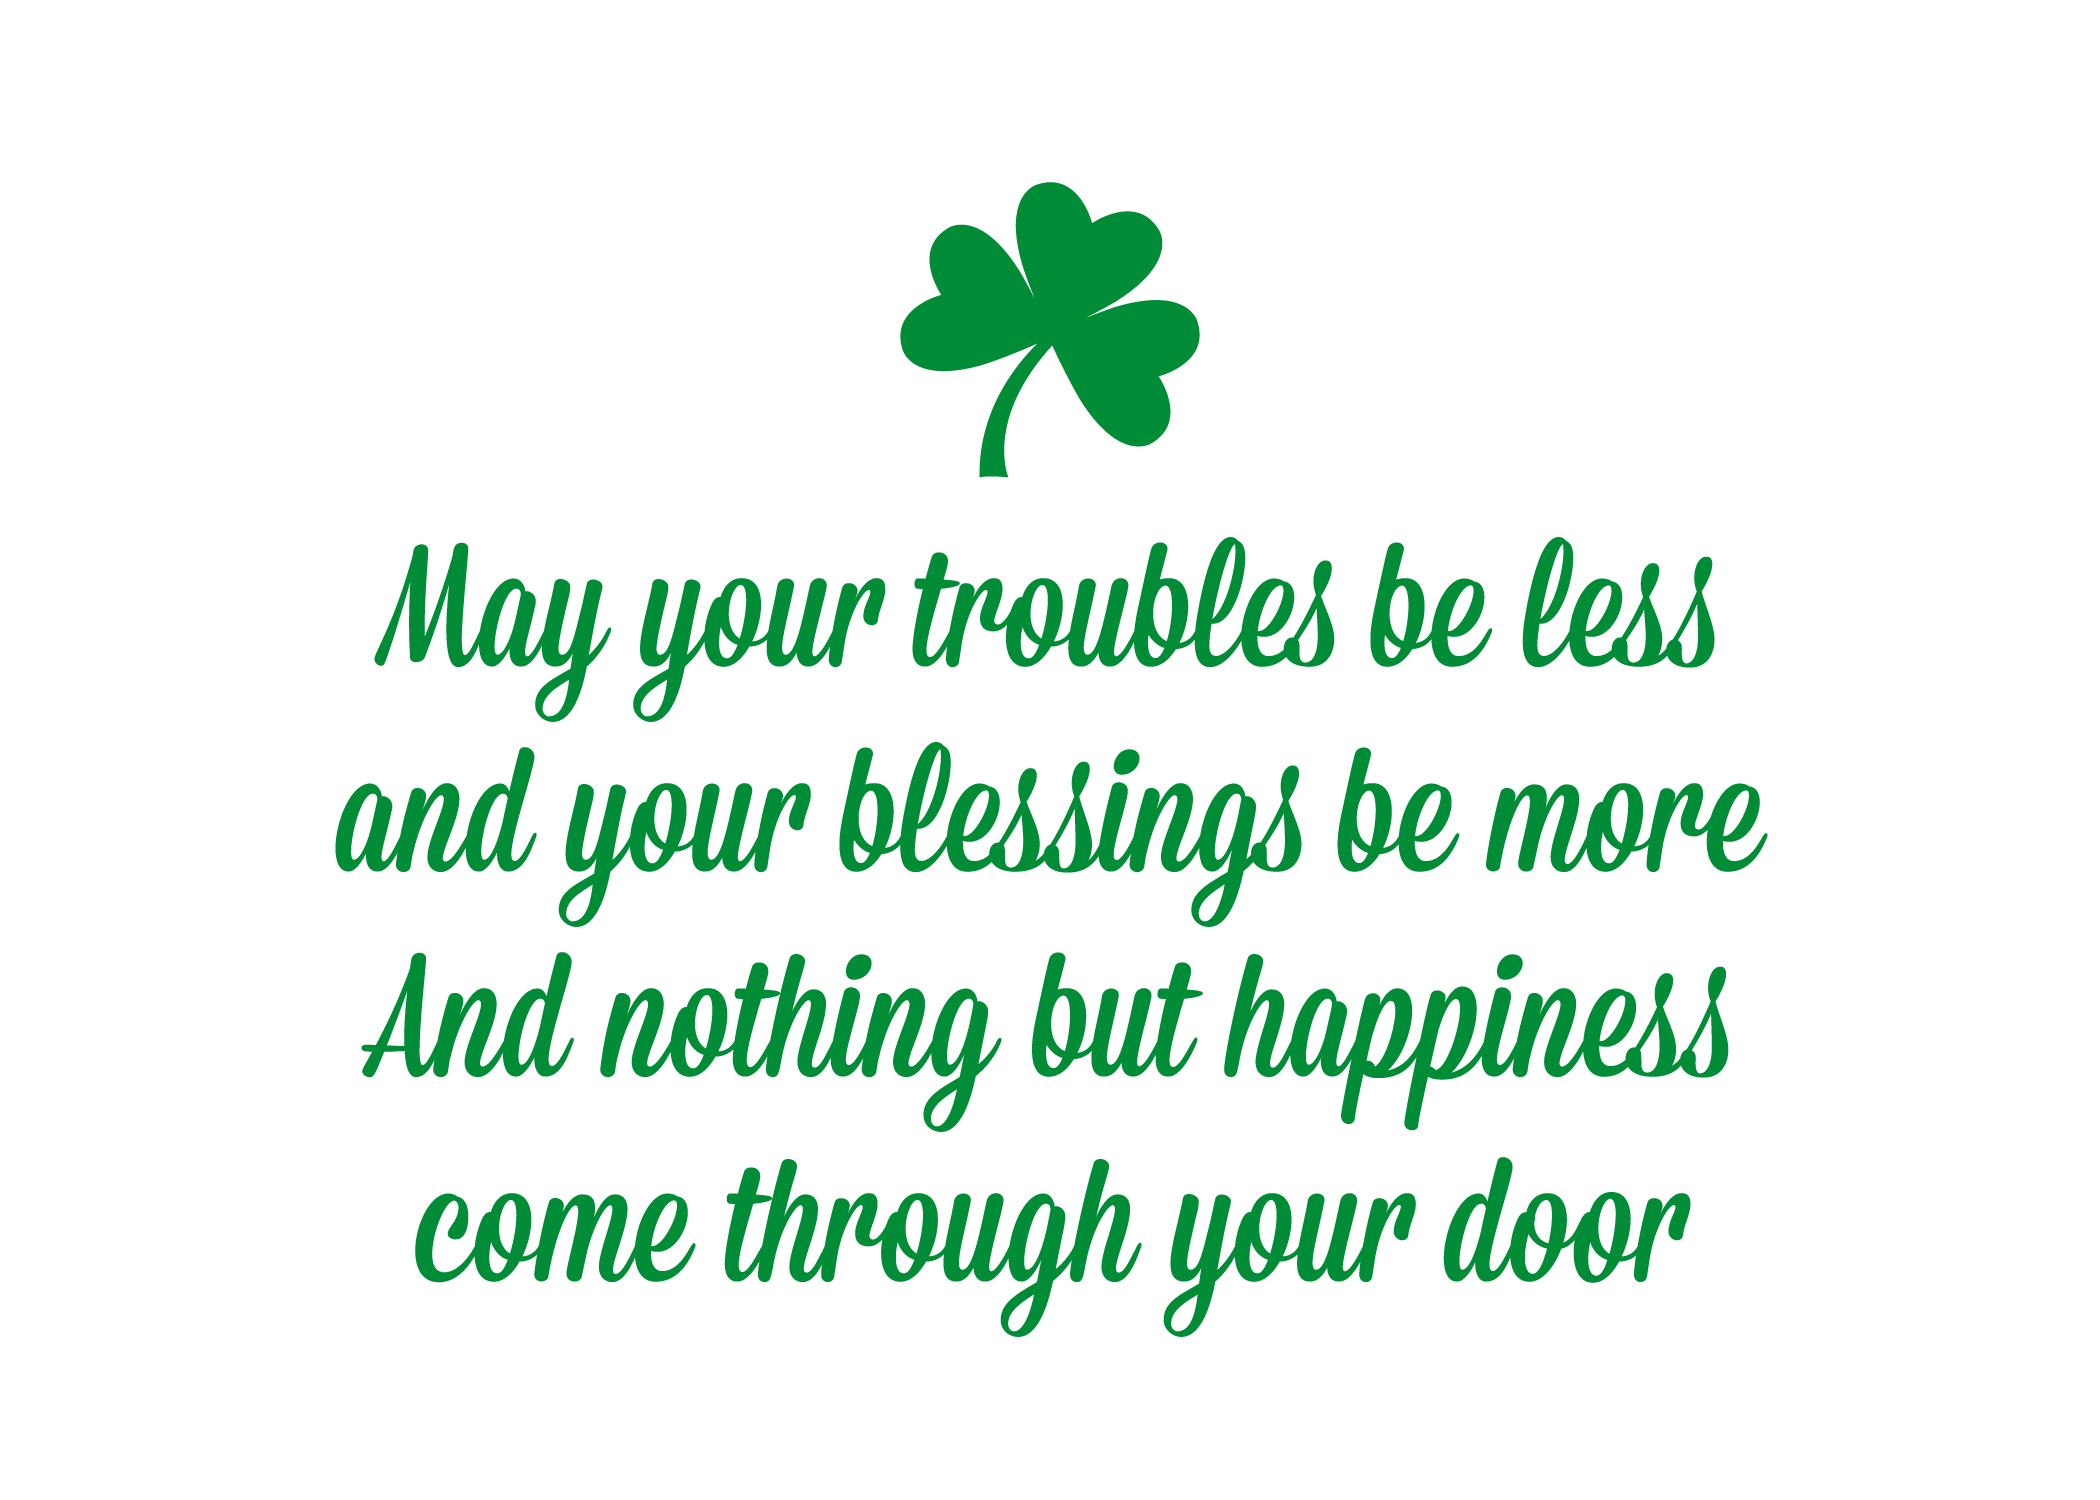 Quotes and patricks images st day St. Patrick's